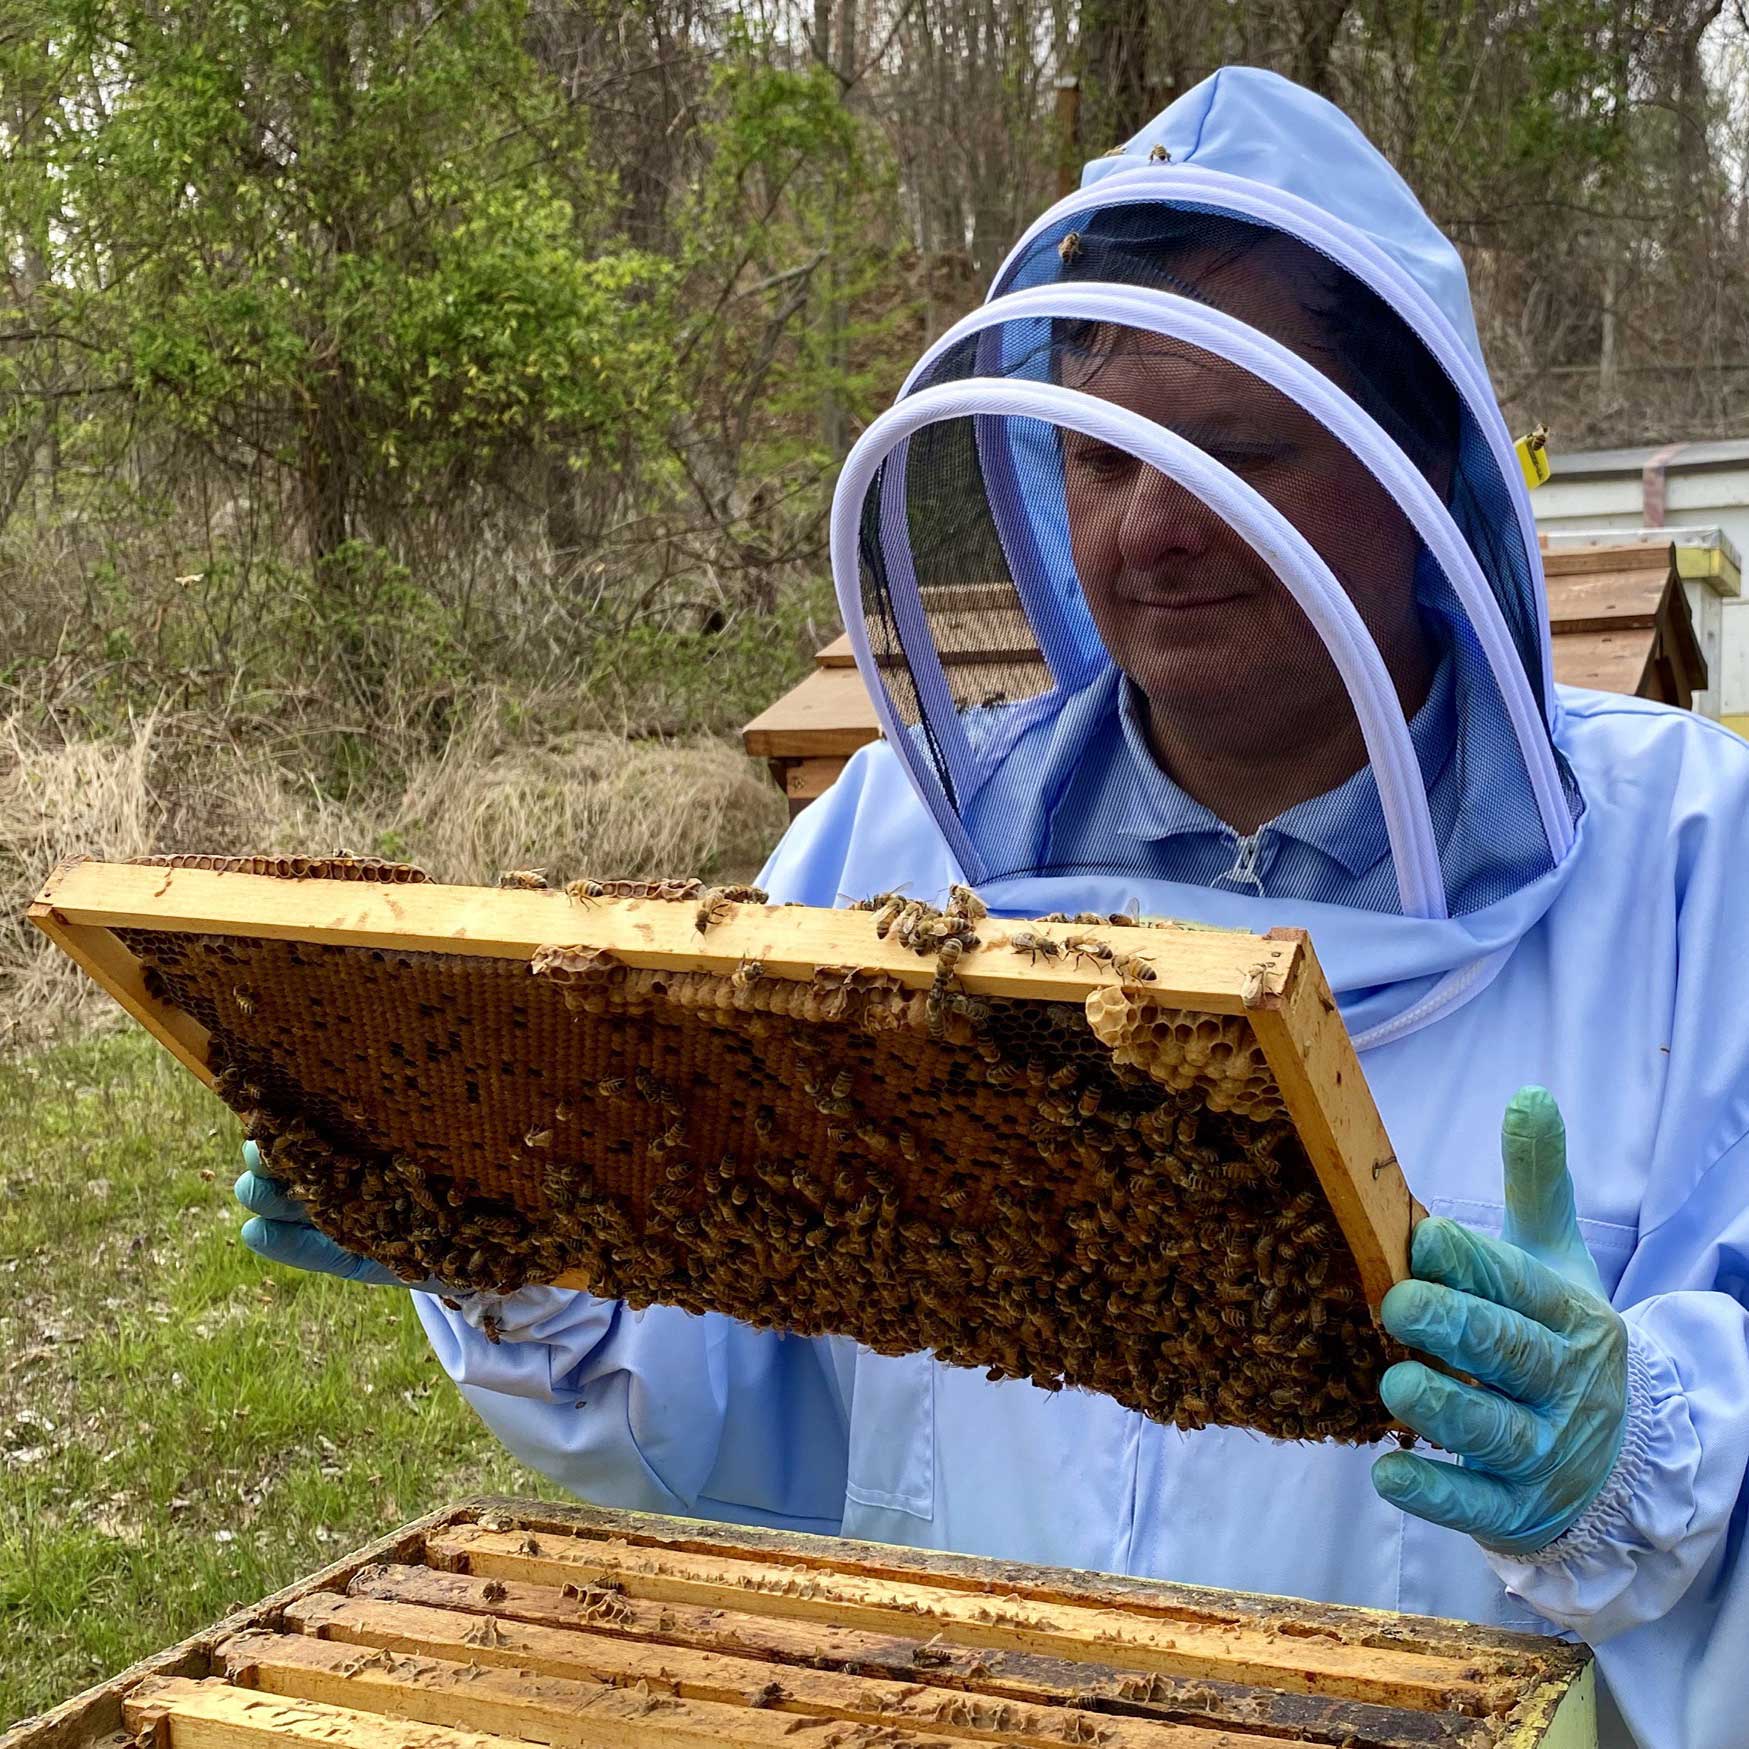 Frank the Beeman and his Honey Bees